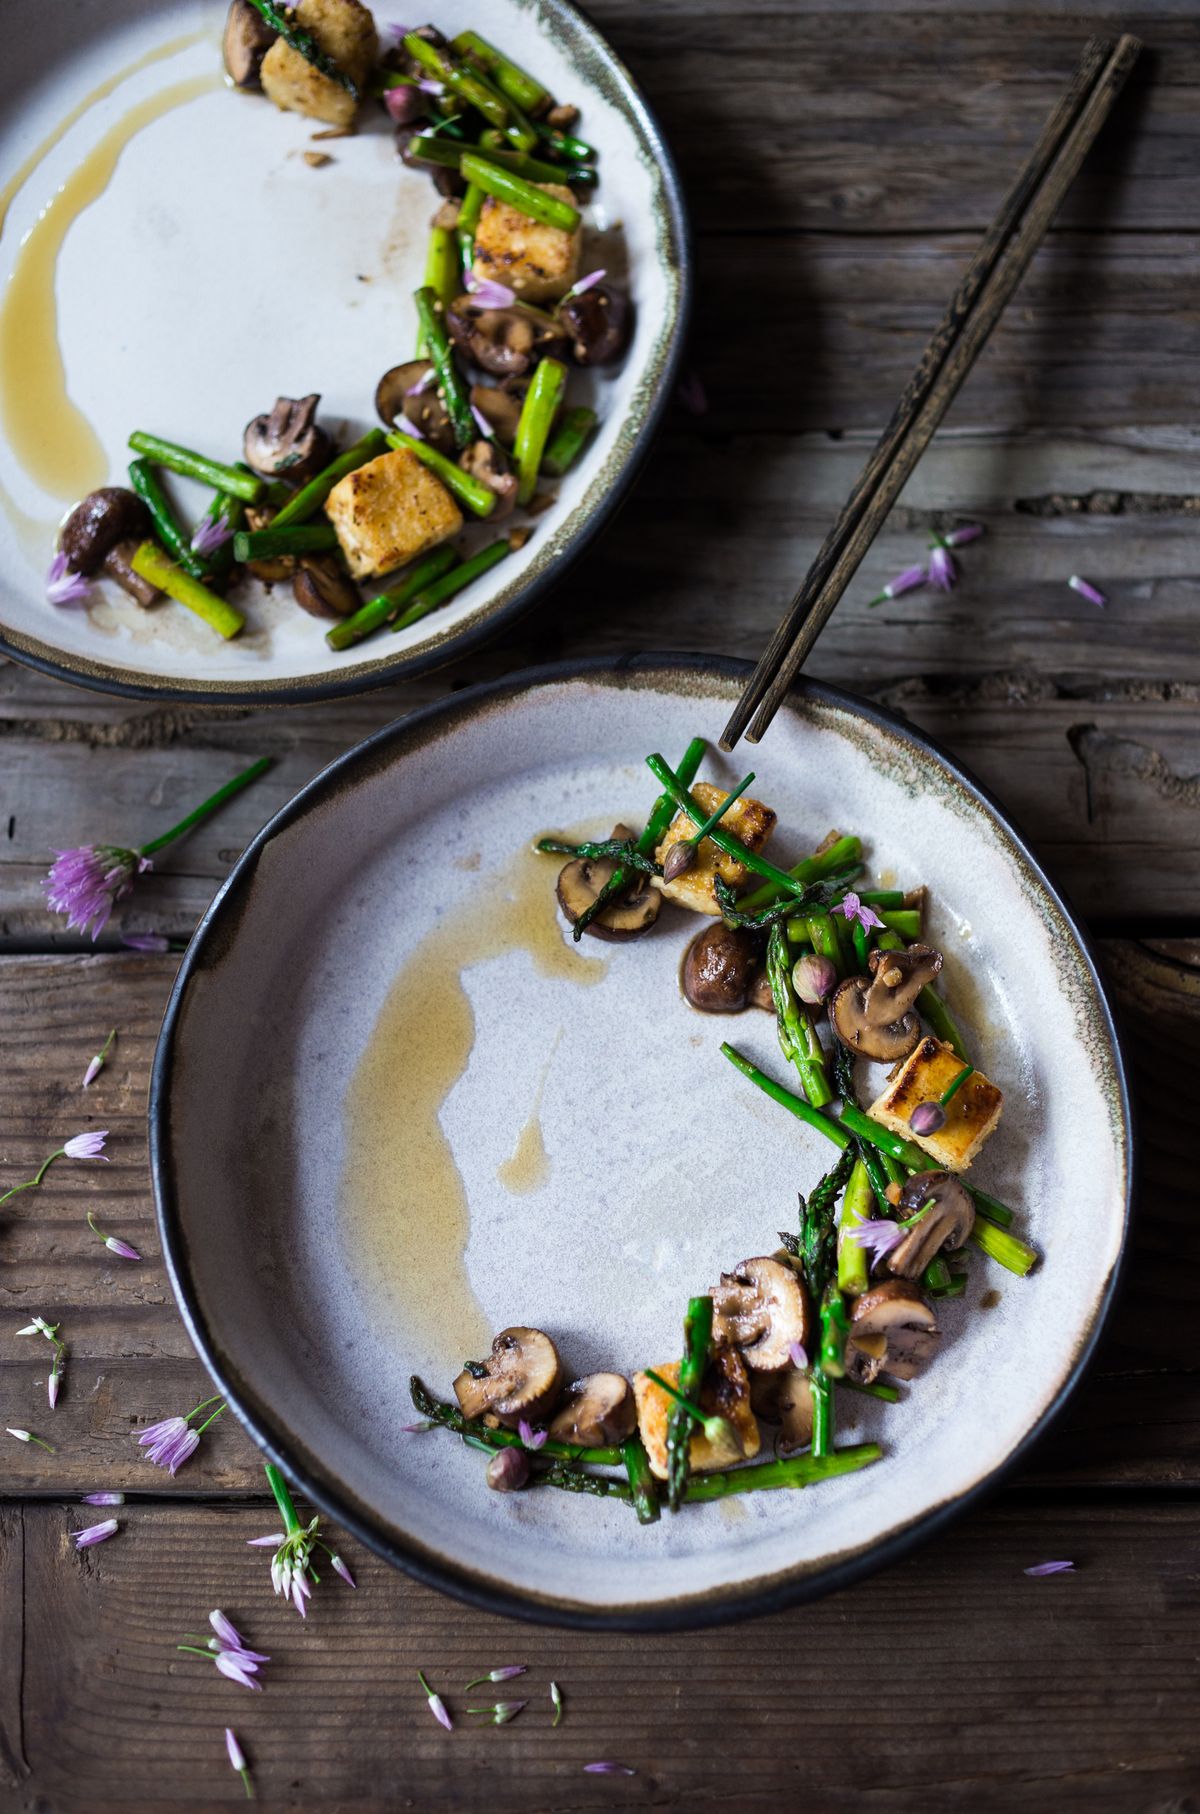 A small drizzle of toasted sesame oil is a perfect finish to Wok-Seared Asparagus with Mushrooms and Crispy Tofu.